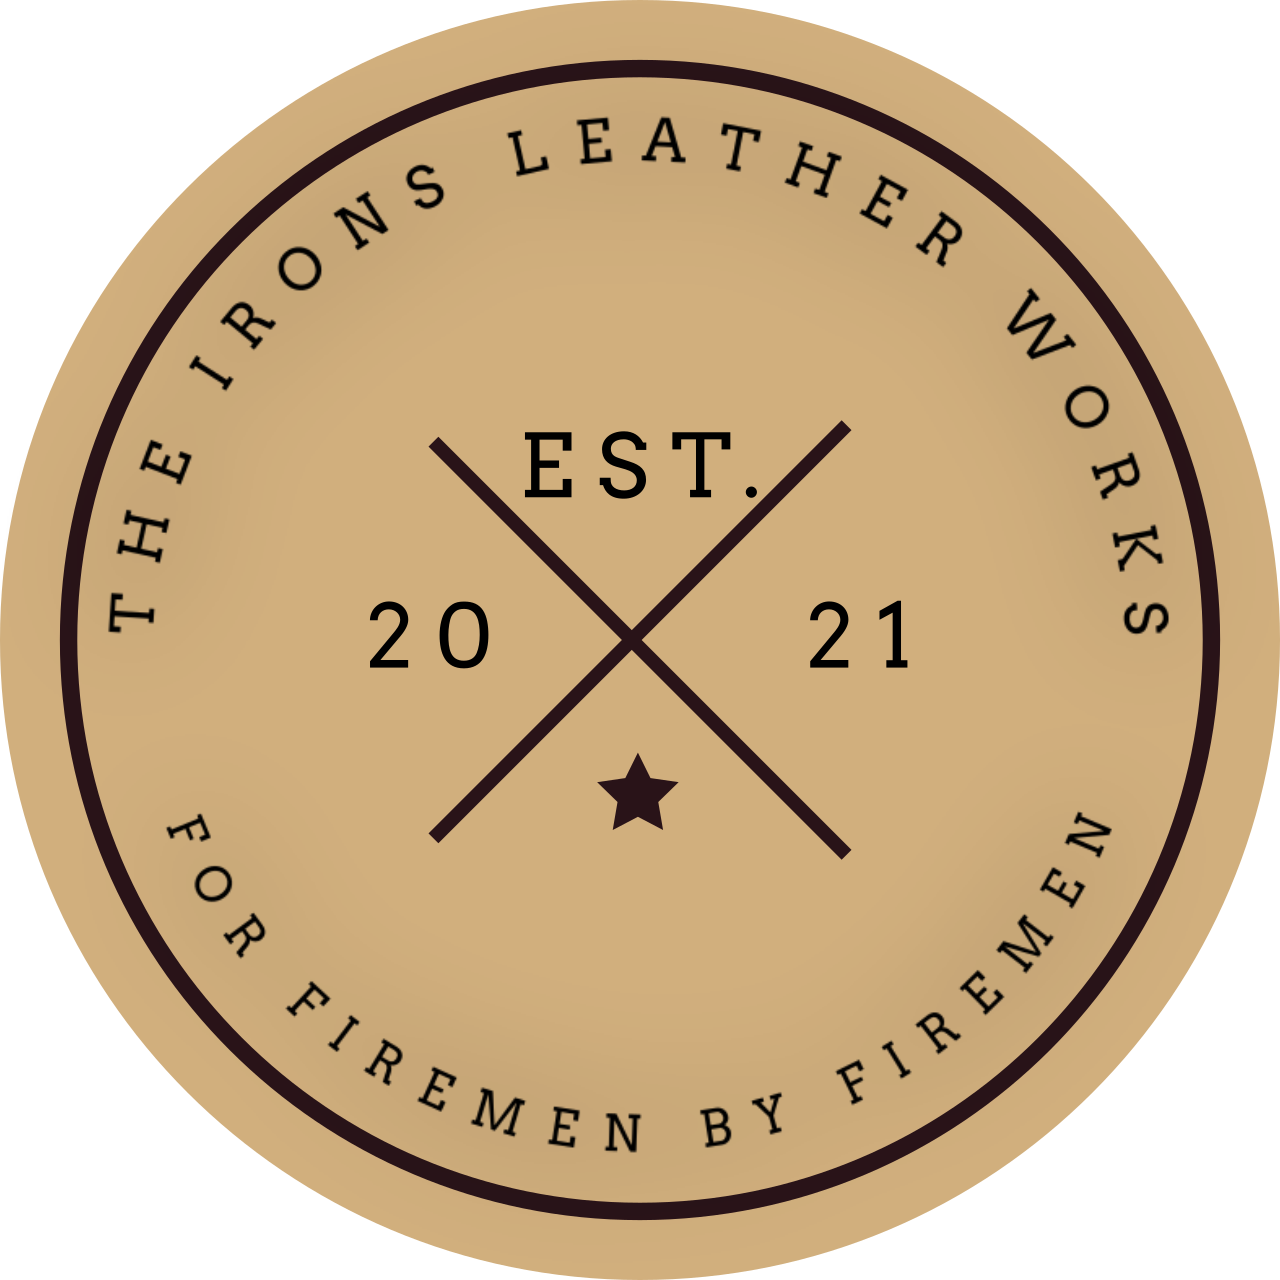 THE IRONS LEATHER WORKS's web page